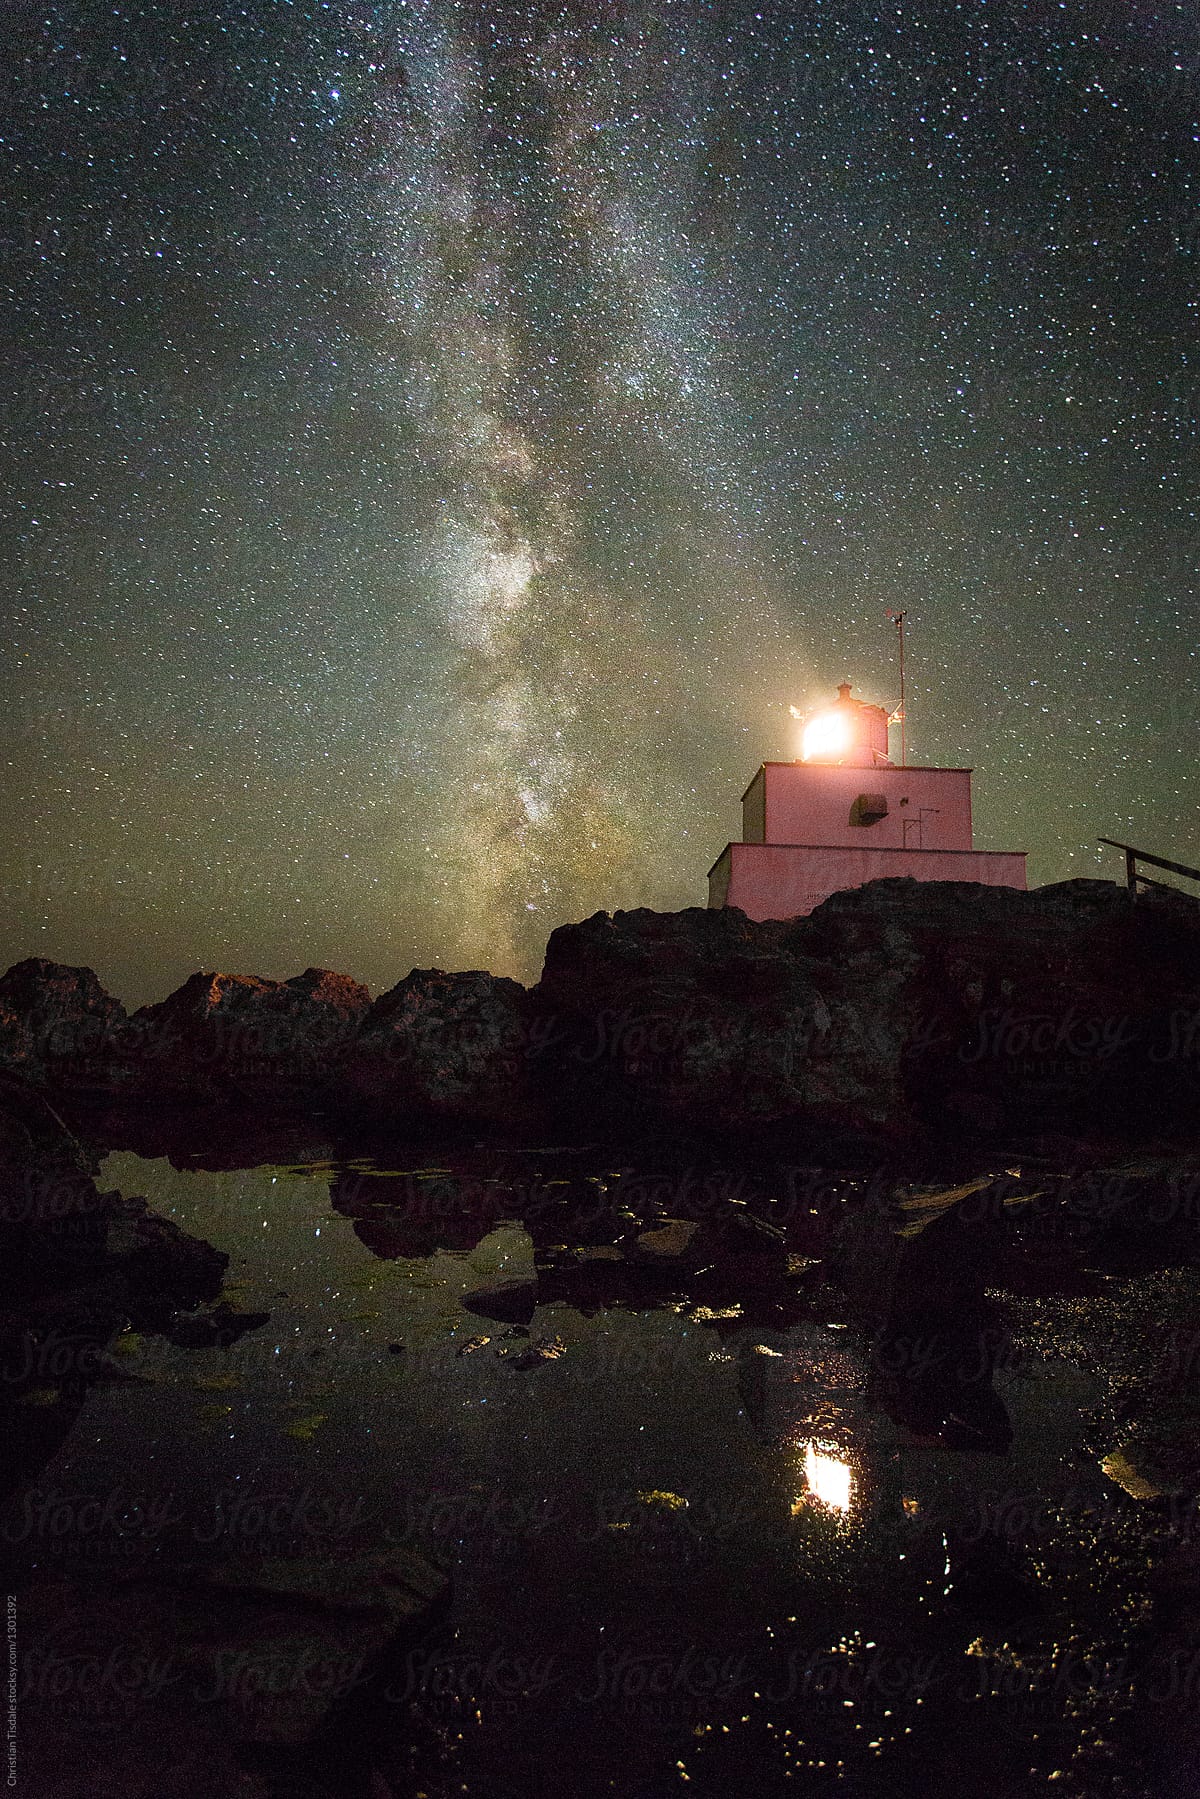 Lighthouse reflecting into a tidal pool with the Milky Way rising up behind it